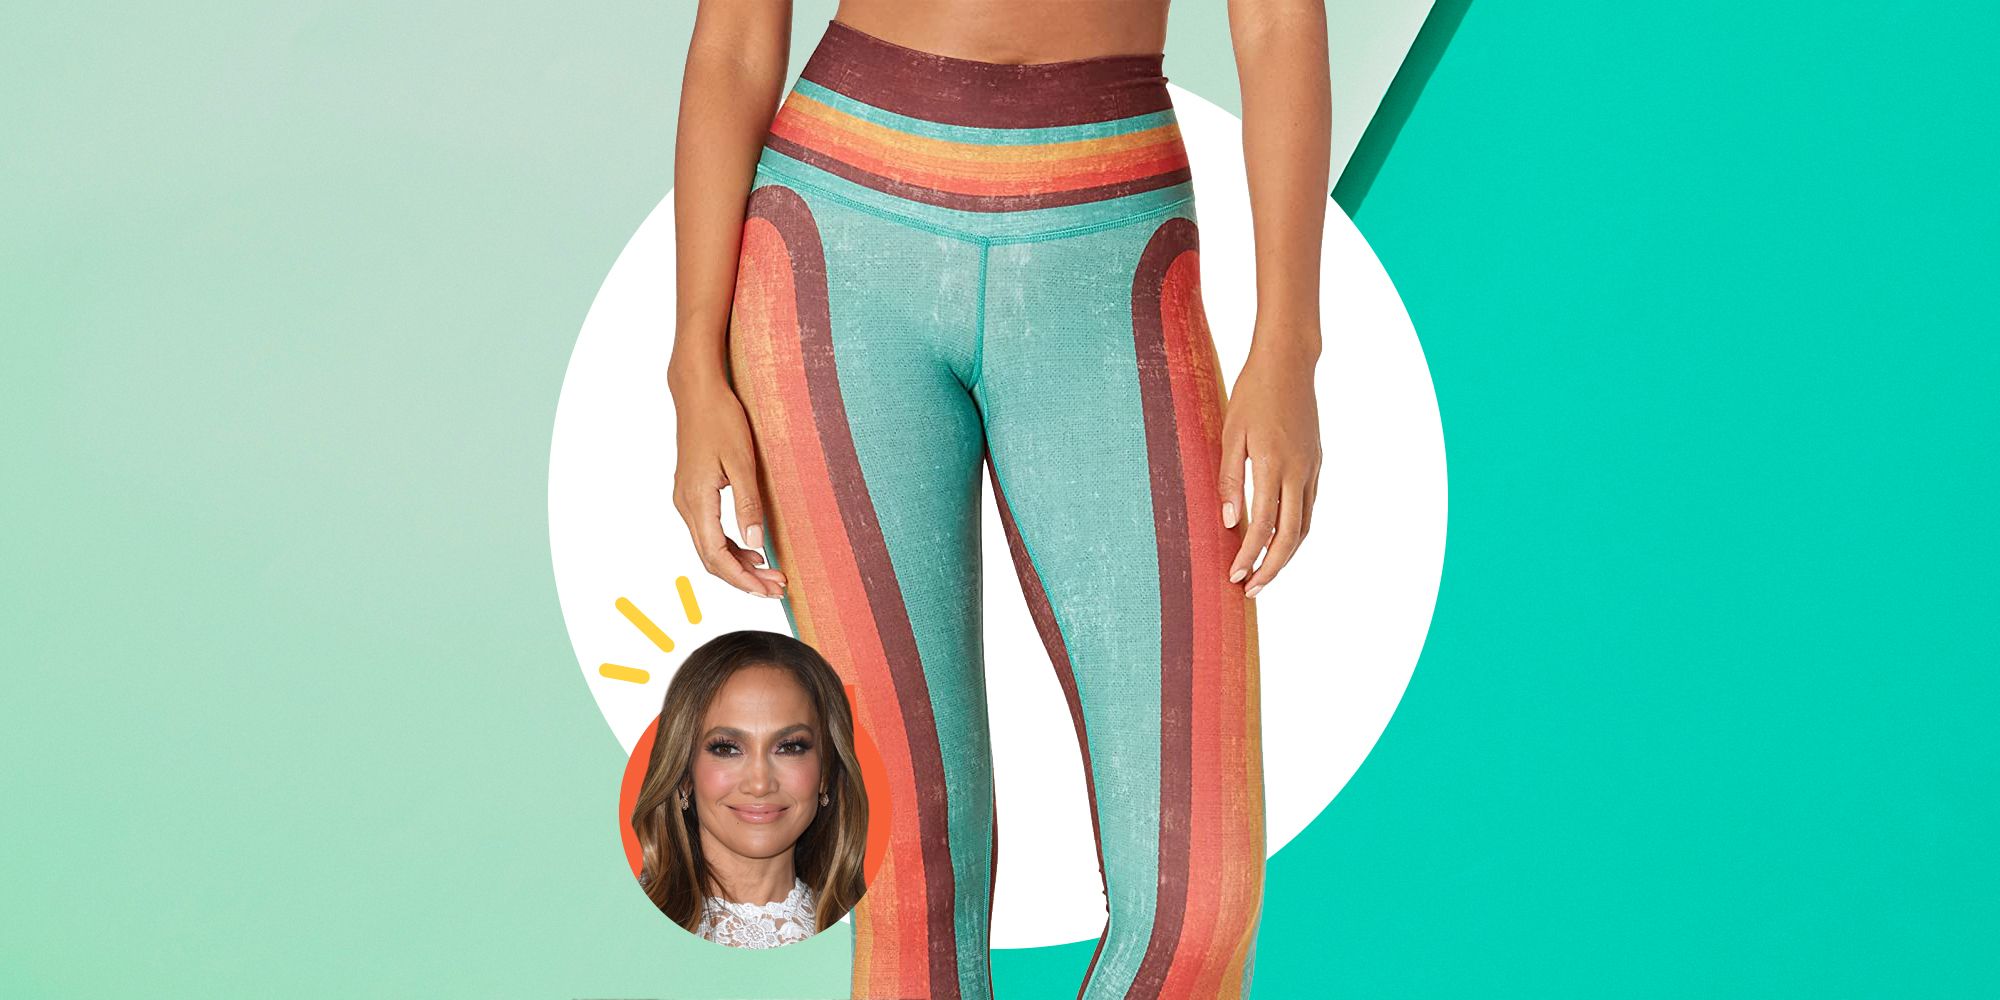 J.Lo's Fave Butt-Sculpting Leggings Are On Major Sale RN For Today Only